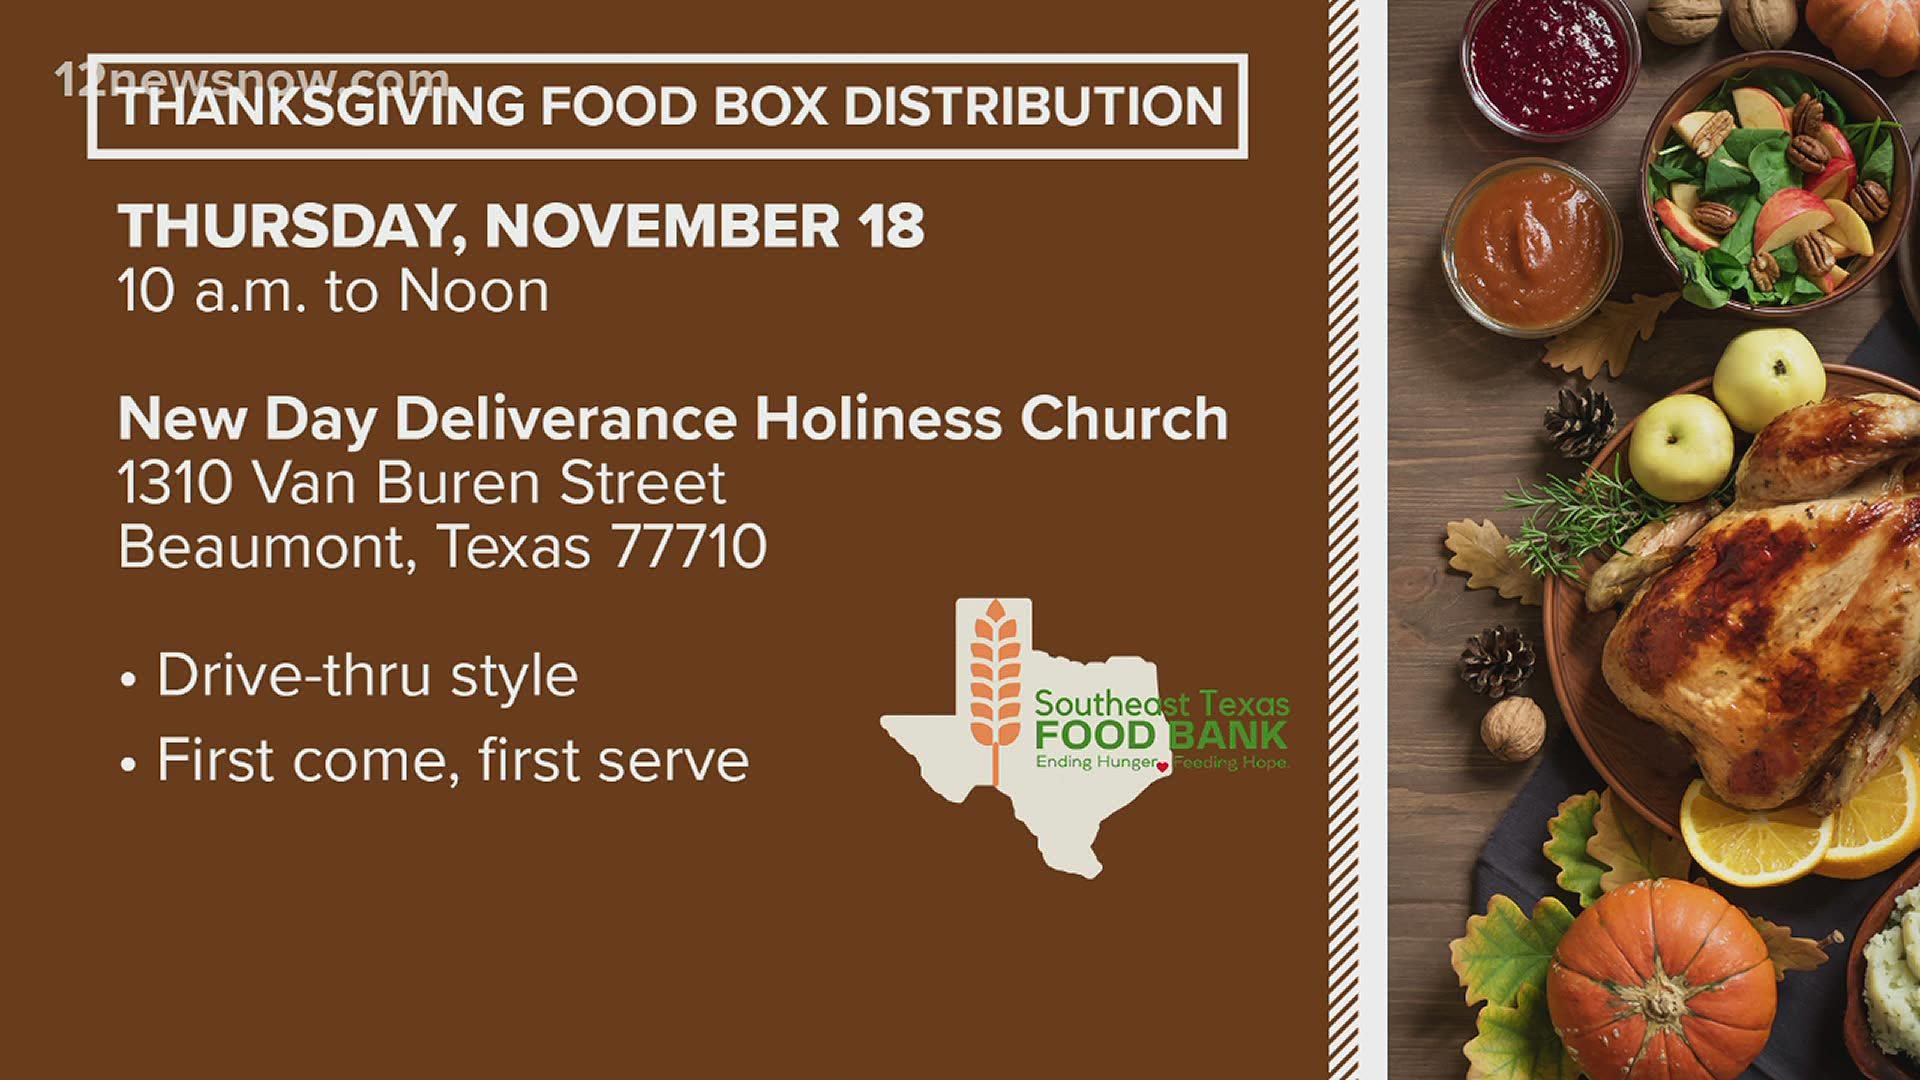 Who is giving away free holiday food boxes near me